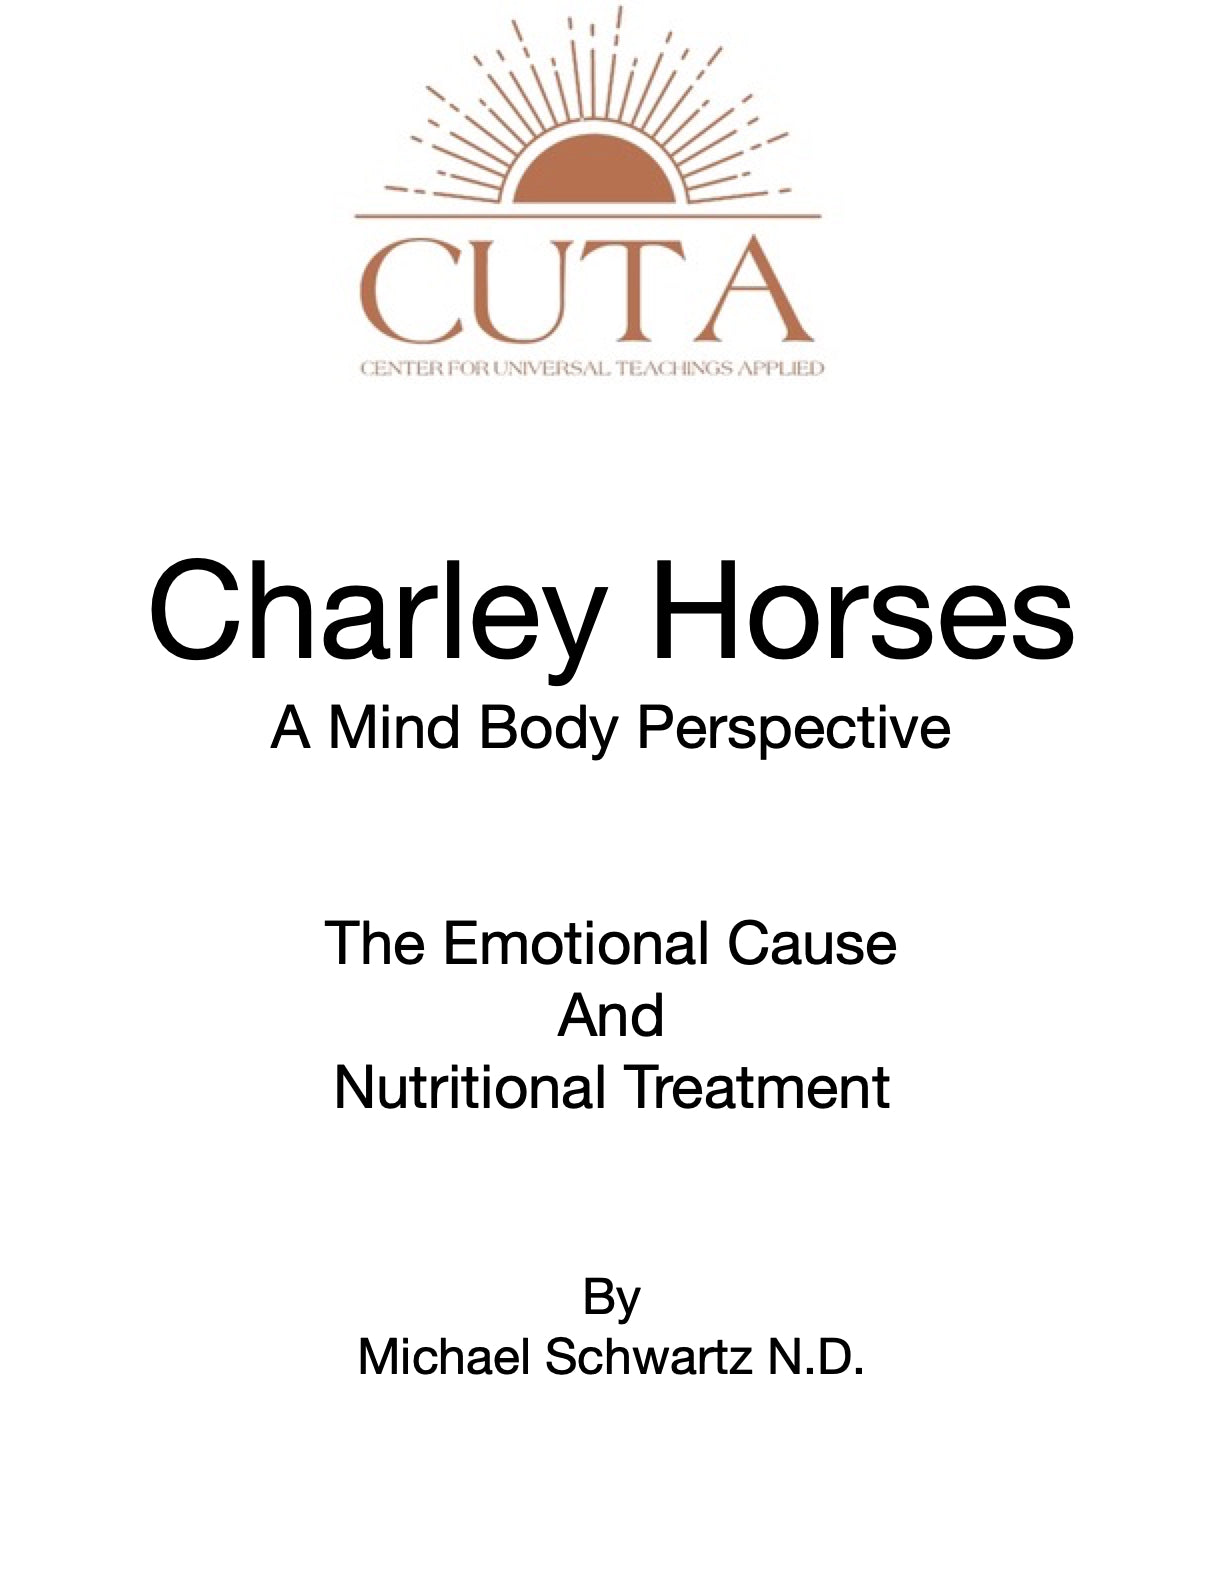 Charley Horses Booklet